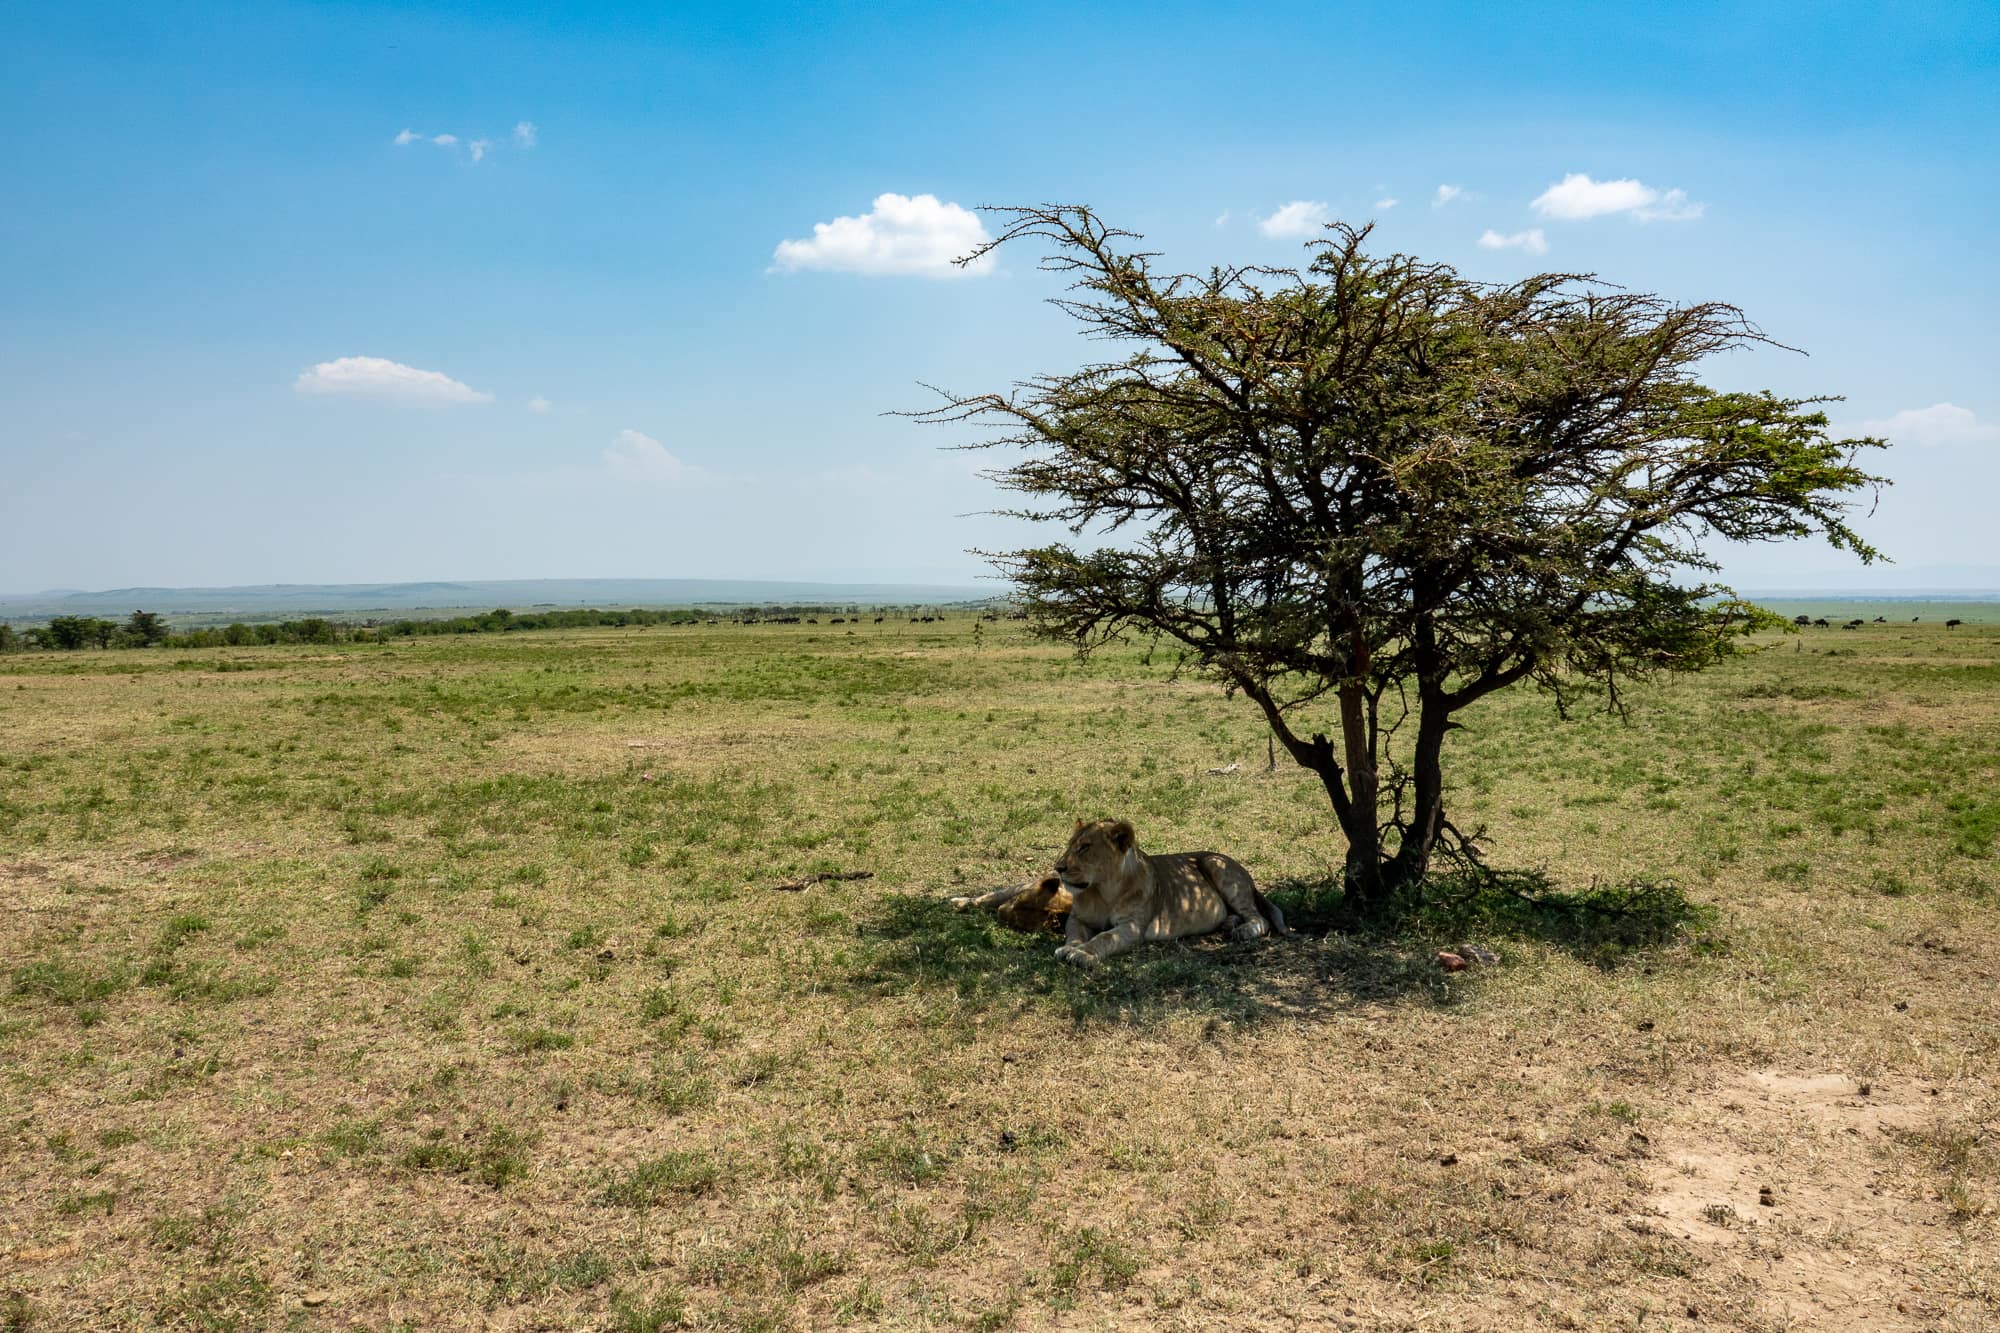 A pair of lions sleeping under a tree during a day